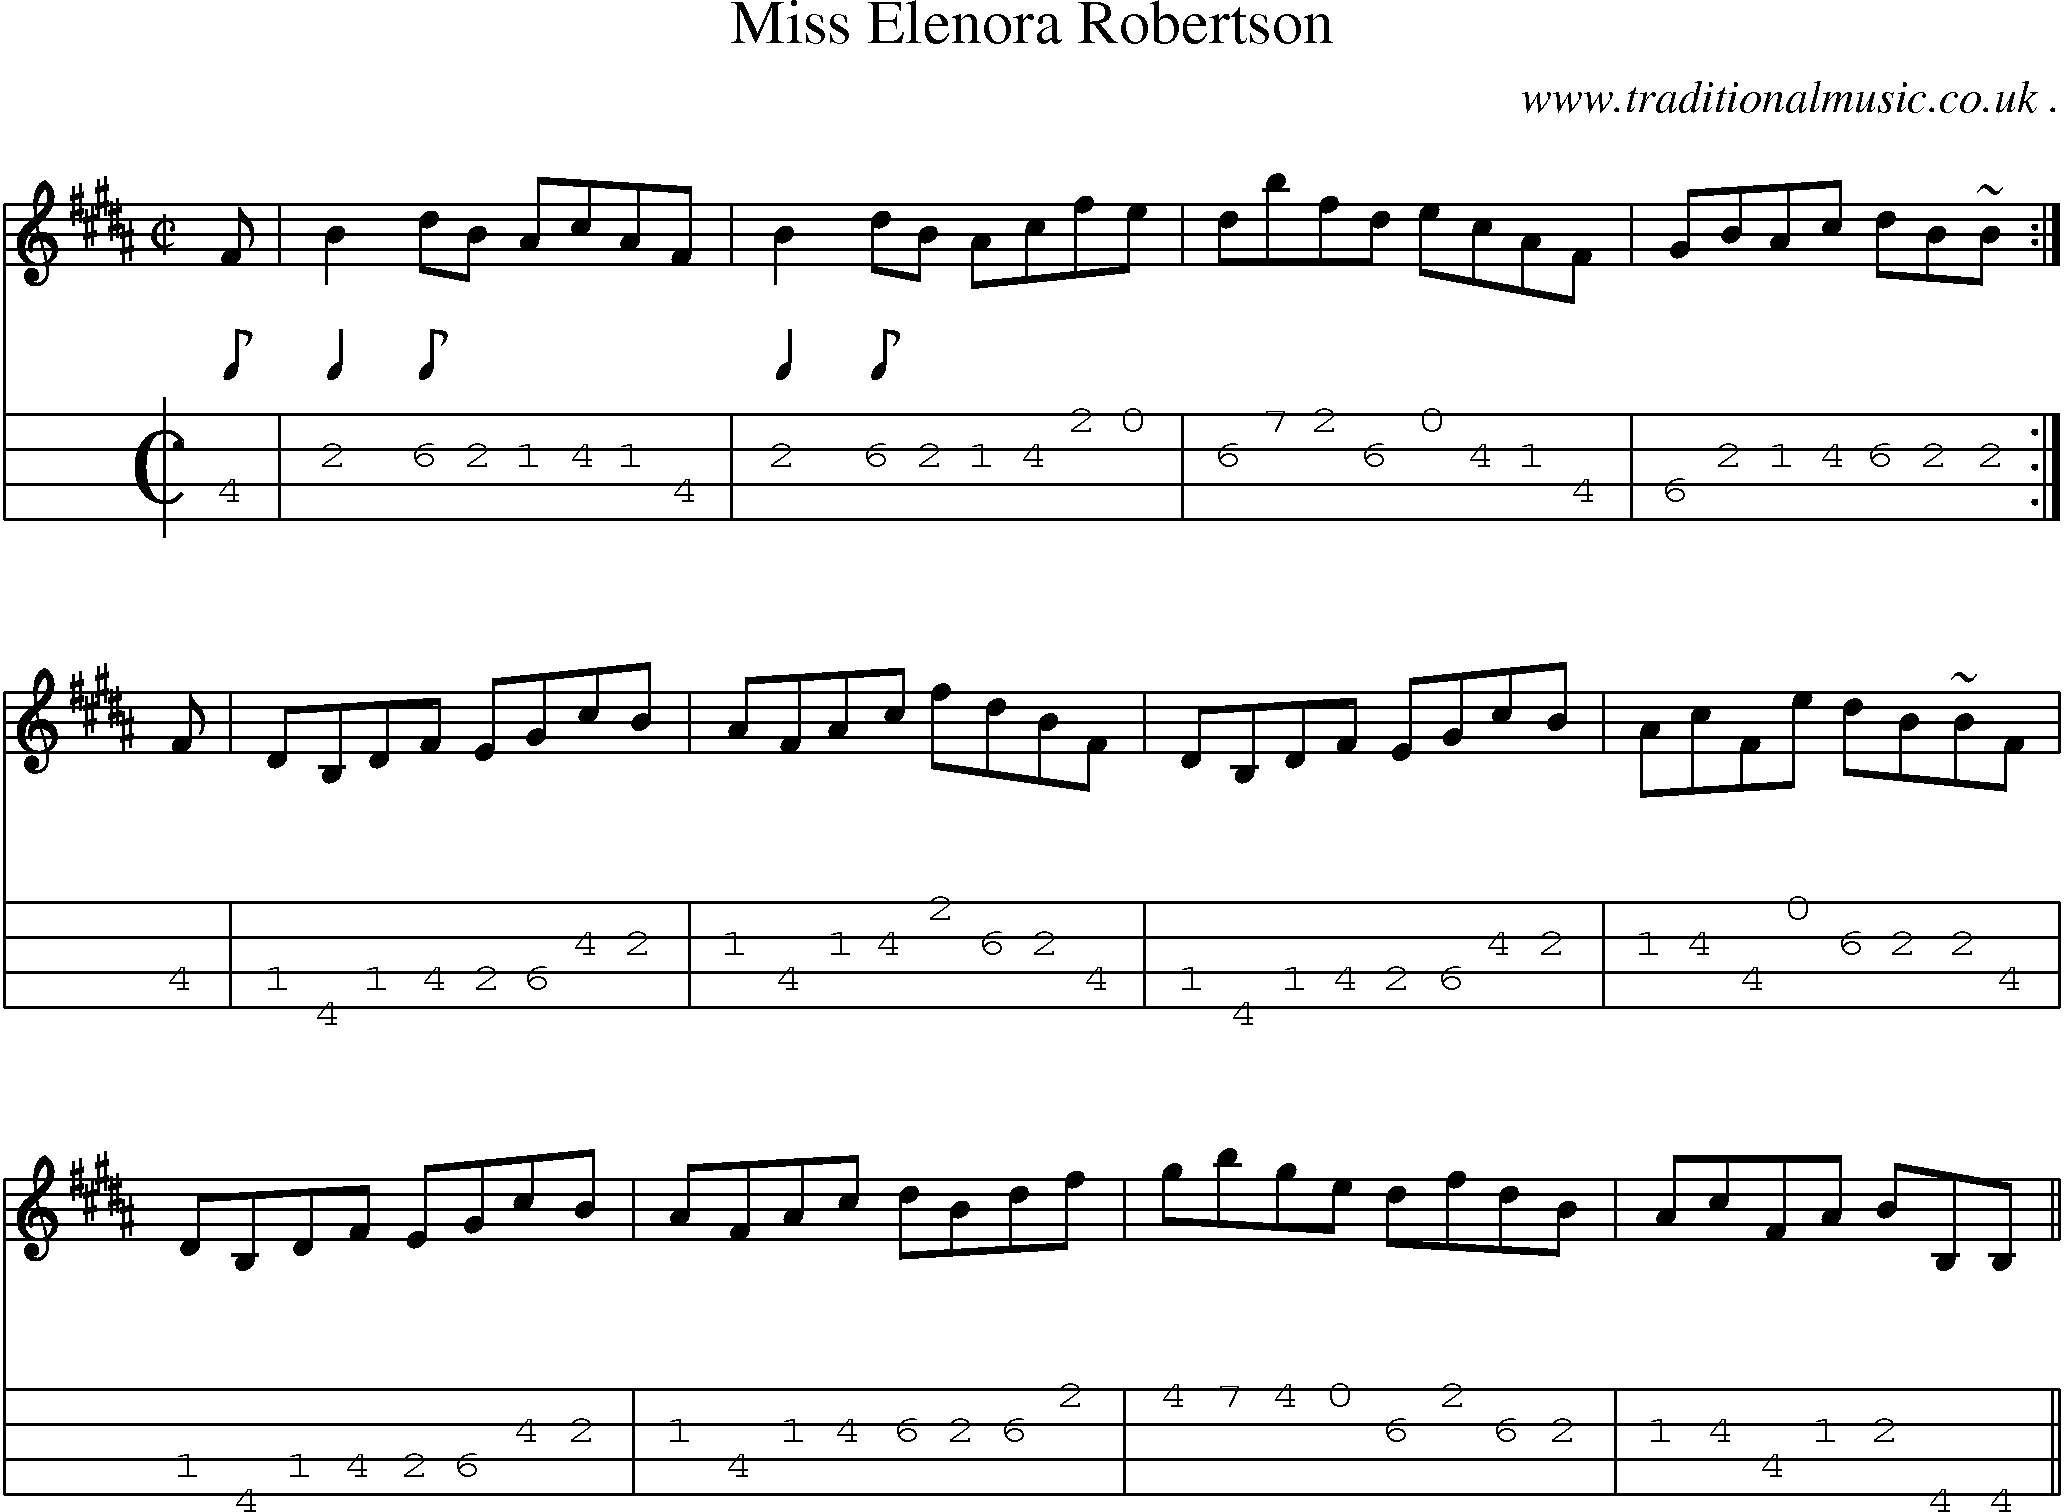 Sheet-music  score, Chords and Mandolin Tabs for Miss Elenora Robertson